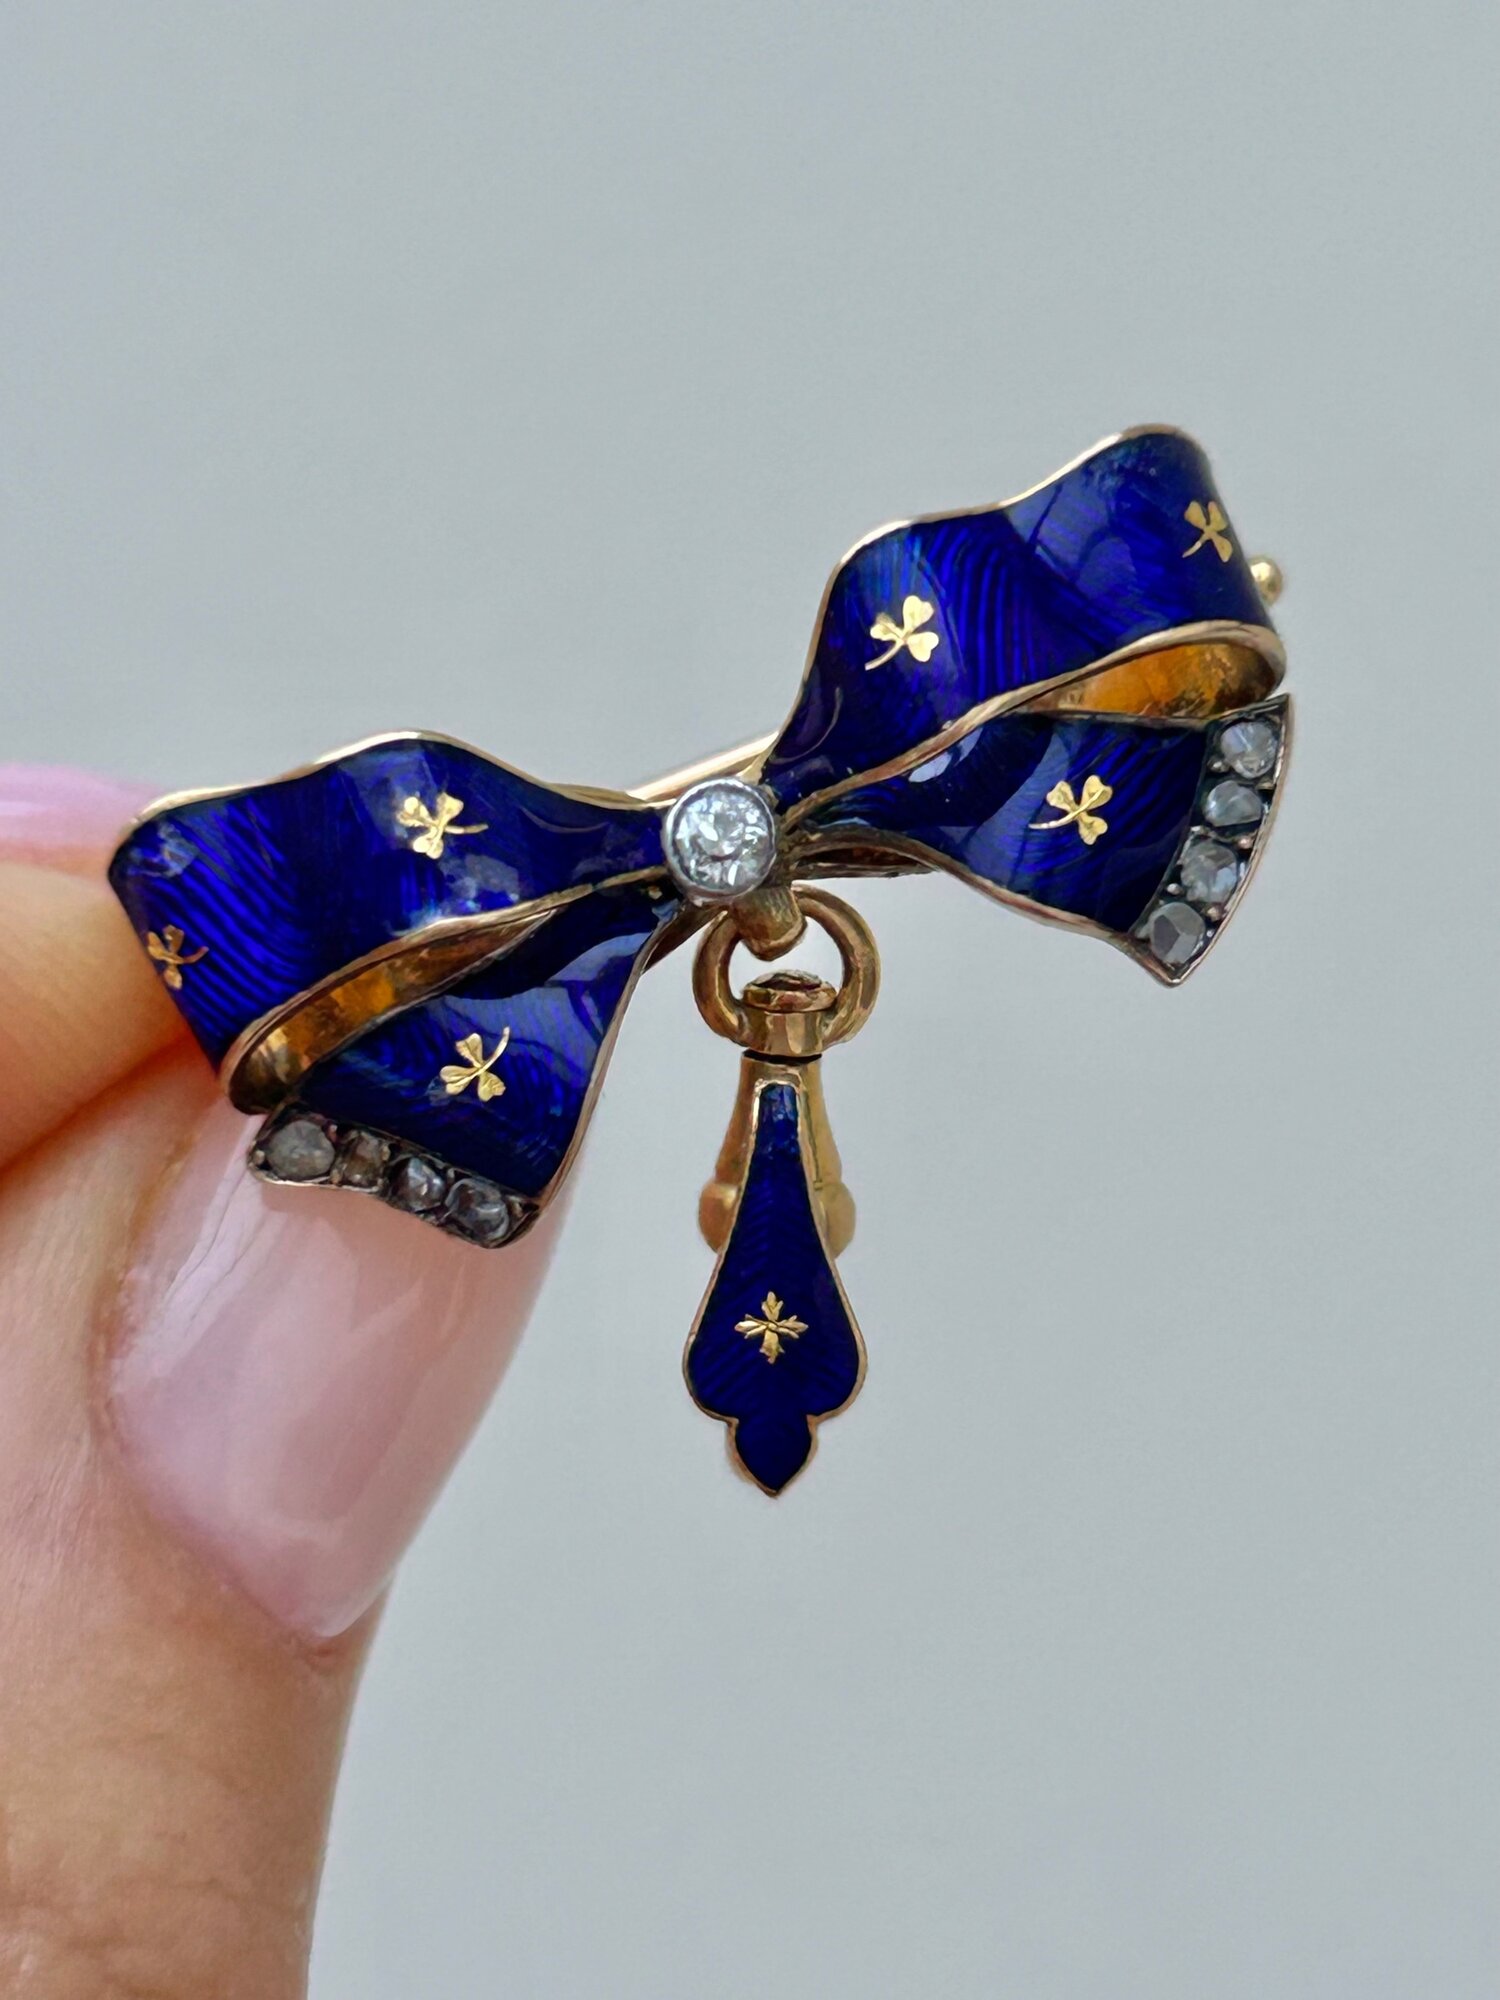 Antique Diamond and Blue Enamel Bow Brooch with DogClip for Charms